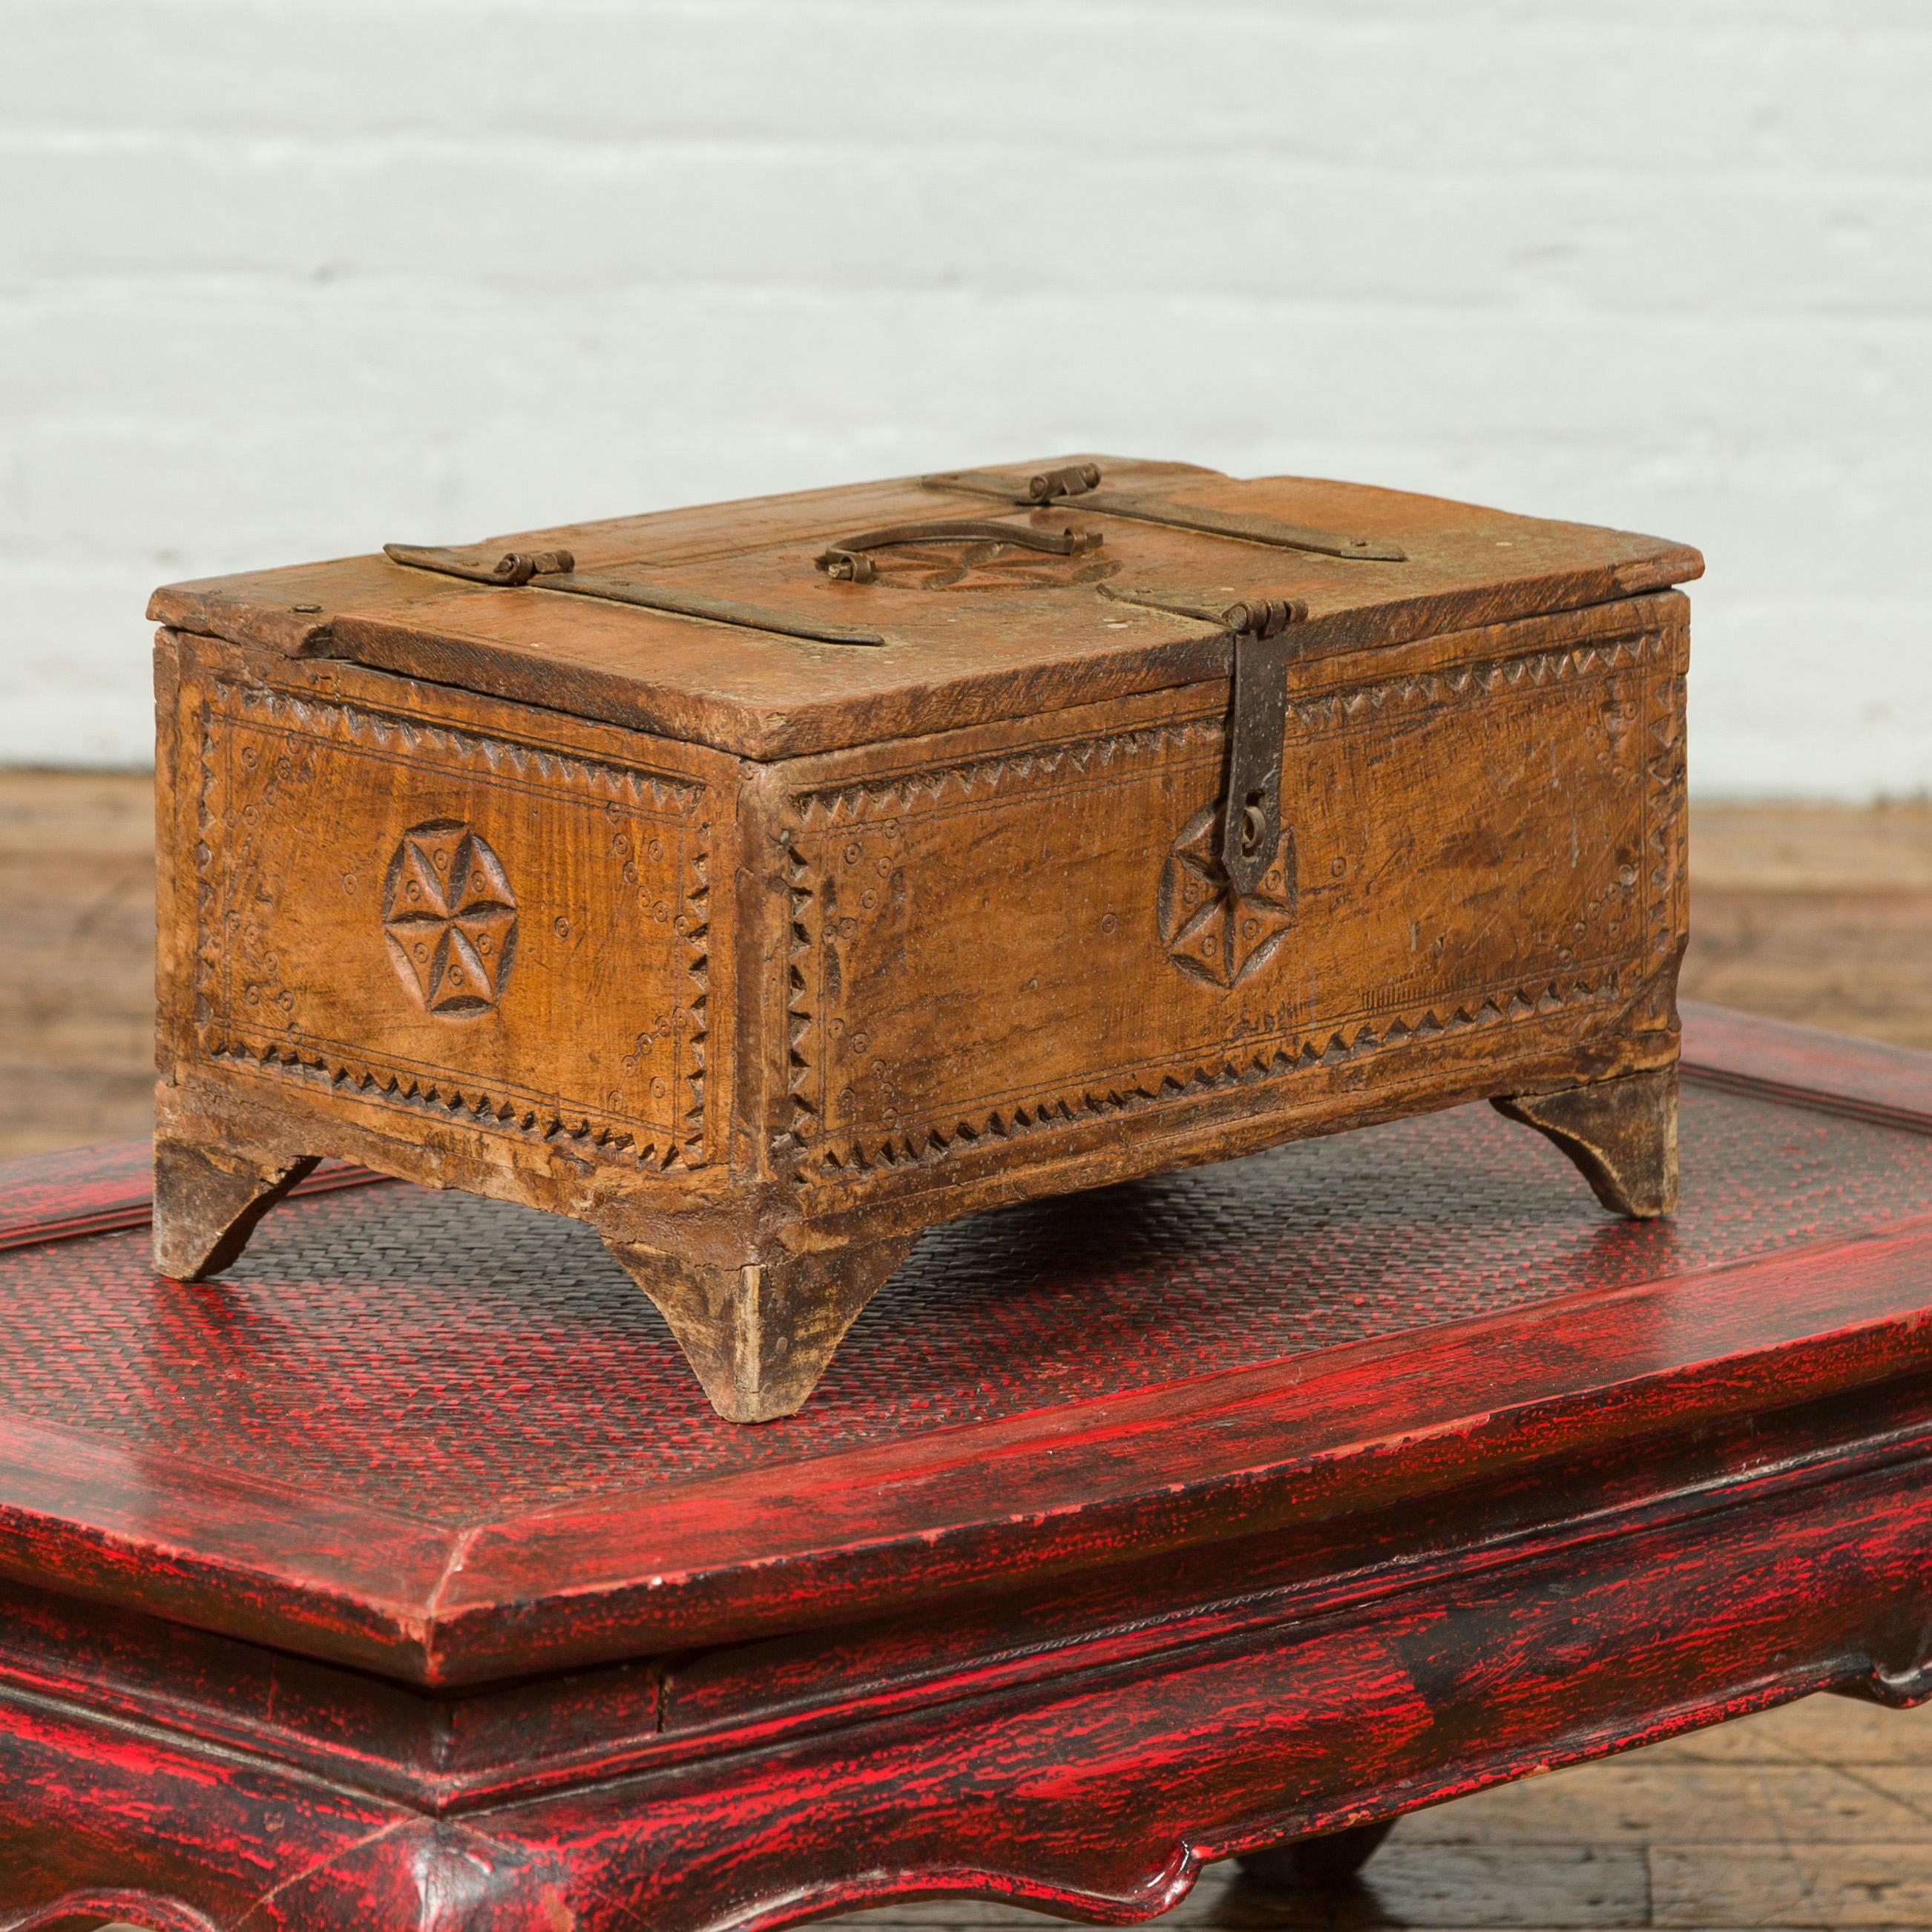 An antique Indian wooden box from the 19th century with carved rosettes and weathered appearance. Topped with a rectangular lid adorned with a central carved rosette echoed on the other sides, this old cash box is raised on bracket feet. Boasting a